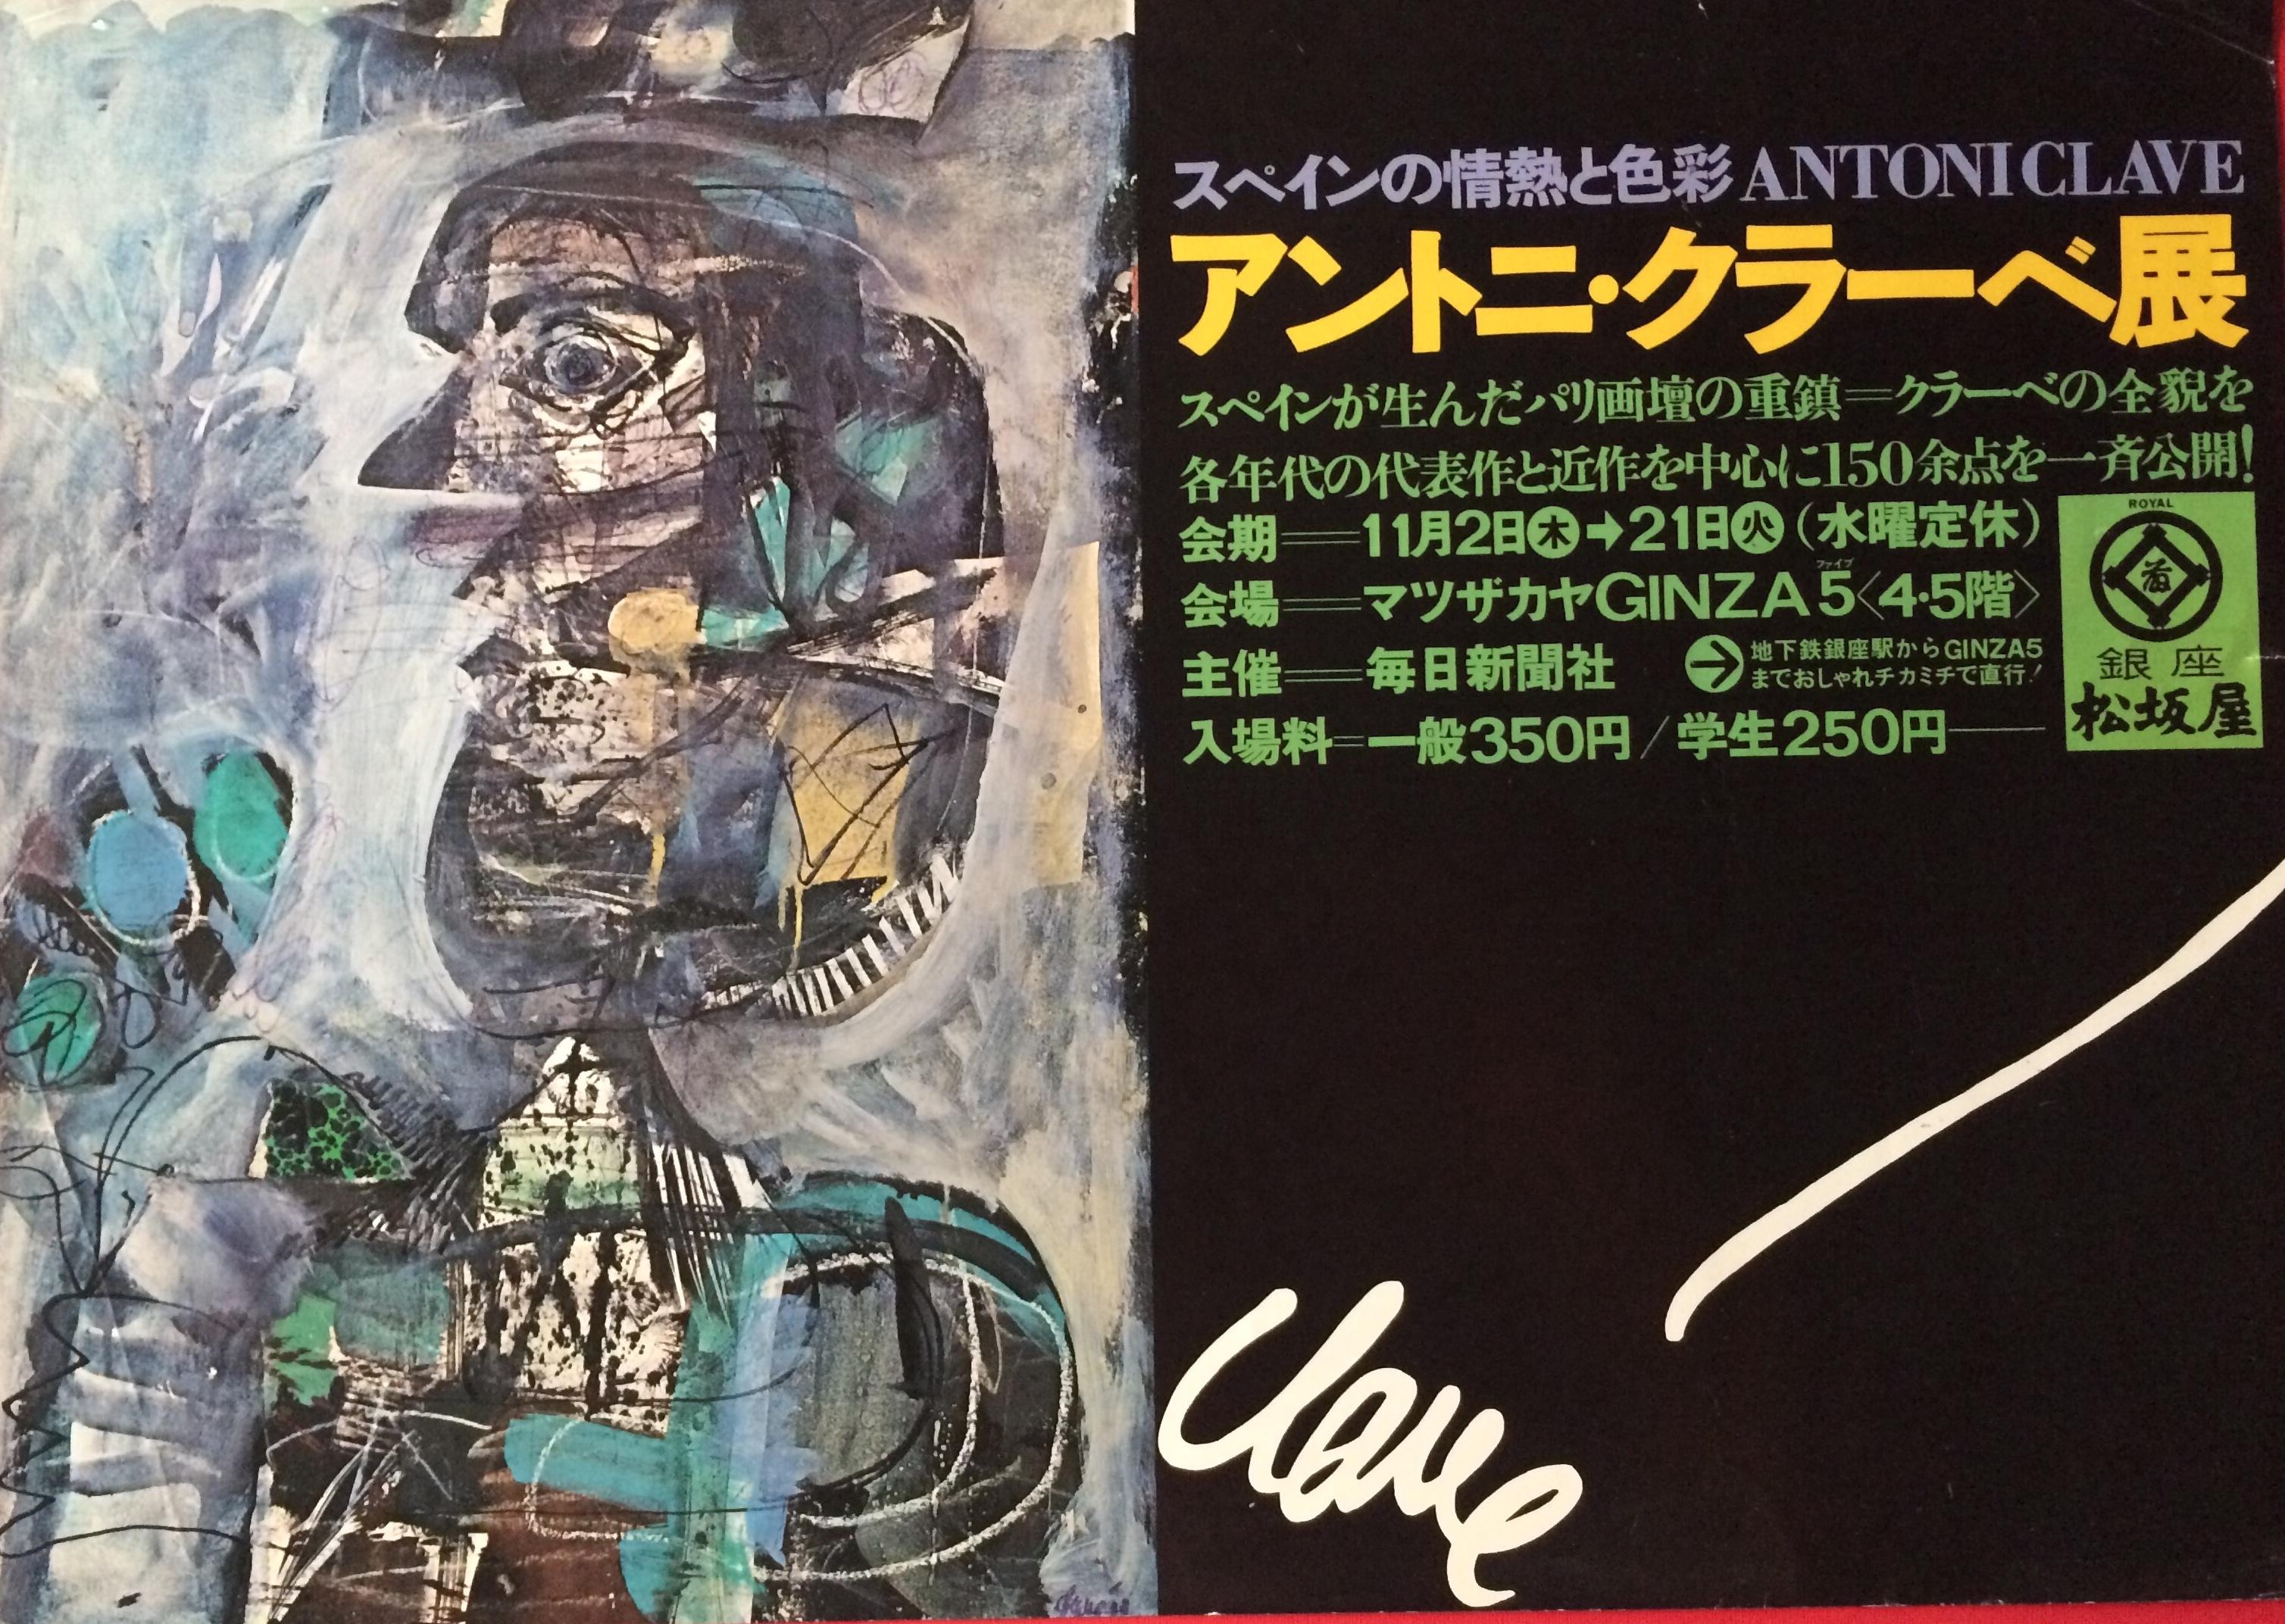 Original art exhibition poster by listed Spanish artist Antoni Clave from his Ginza Japan show. 

This interesting poster clearly depicts one wonderful work by this brilliant artist. Antoni Clavé (5 April 1913 – 1 September 2005) was a Catalan